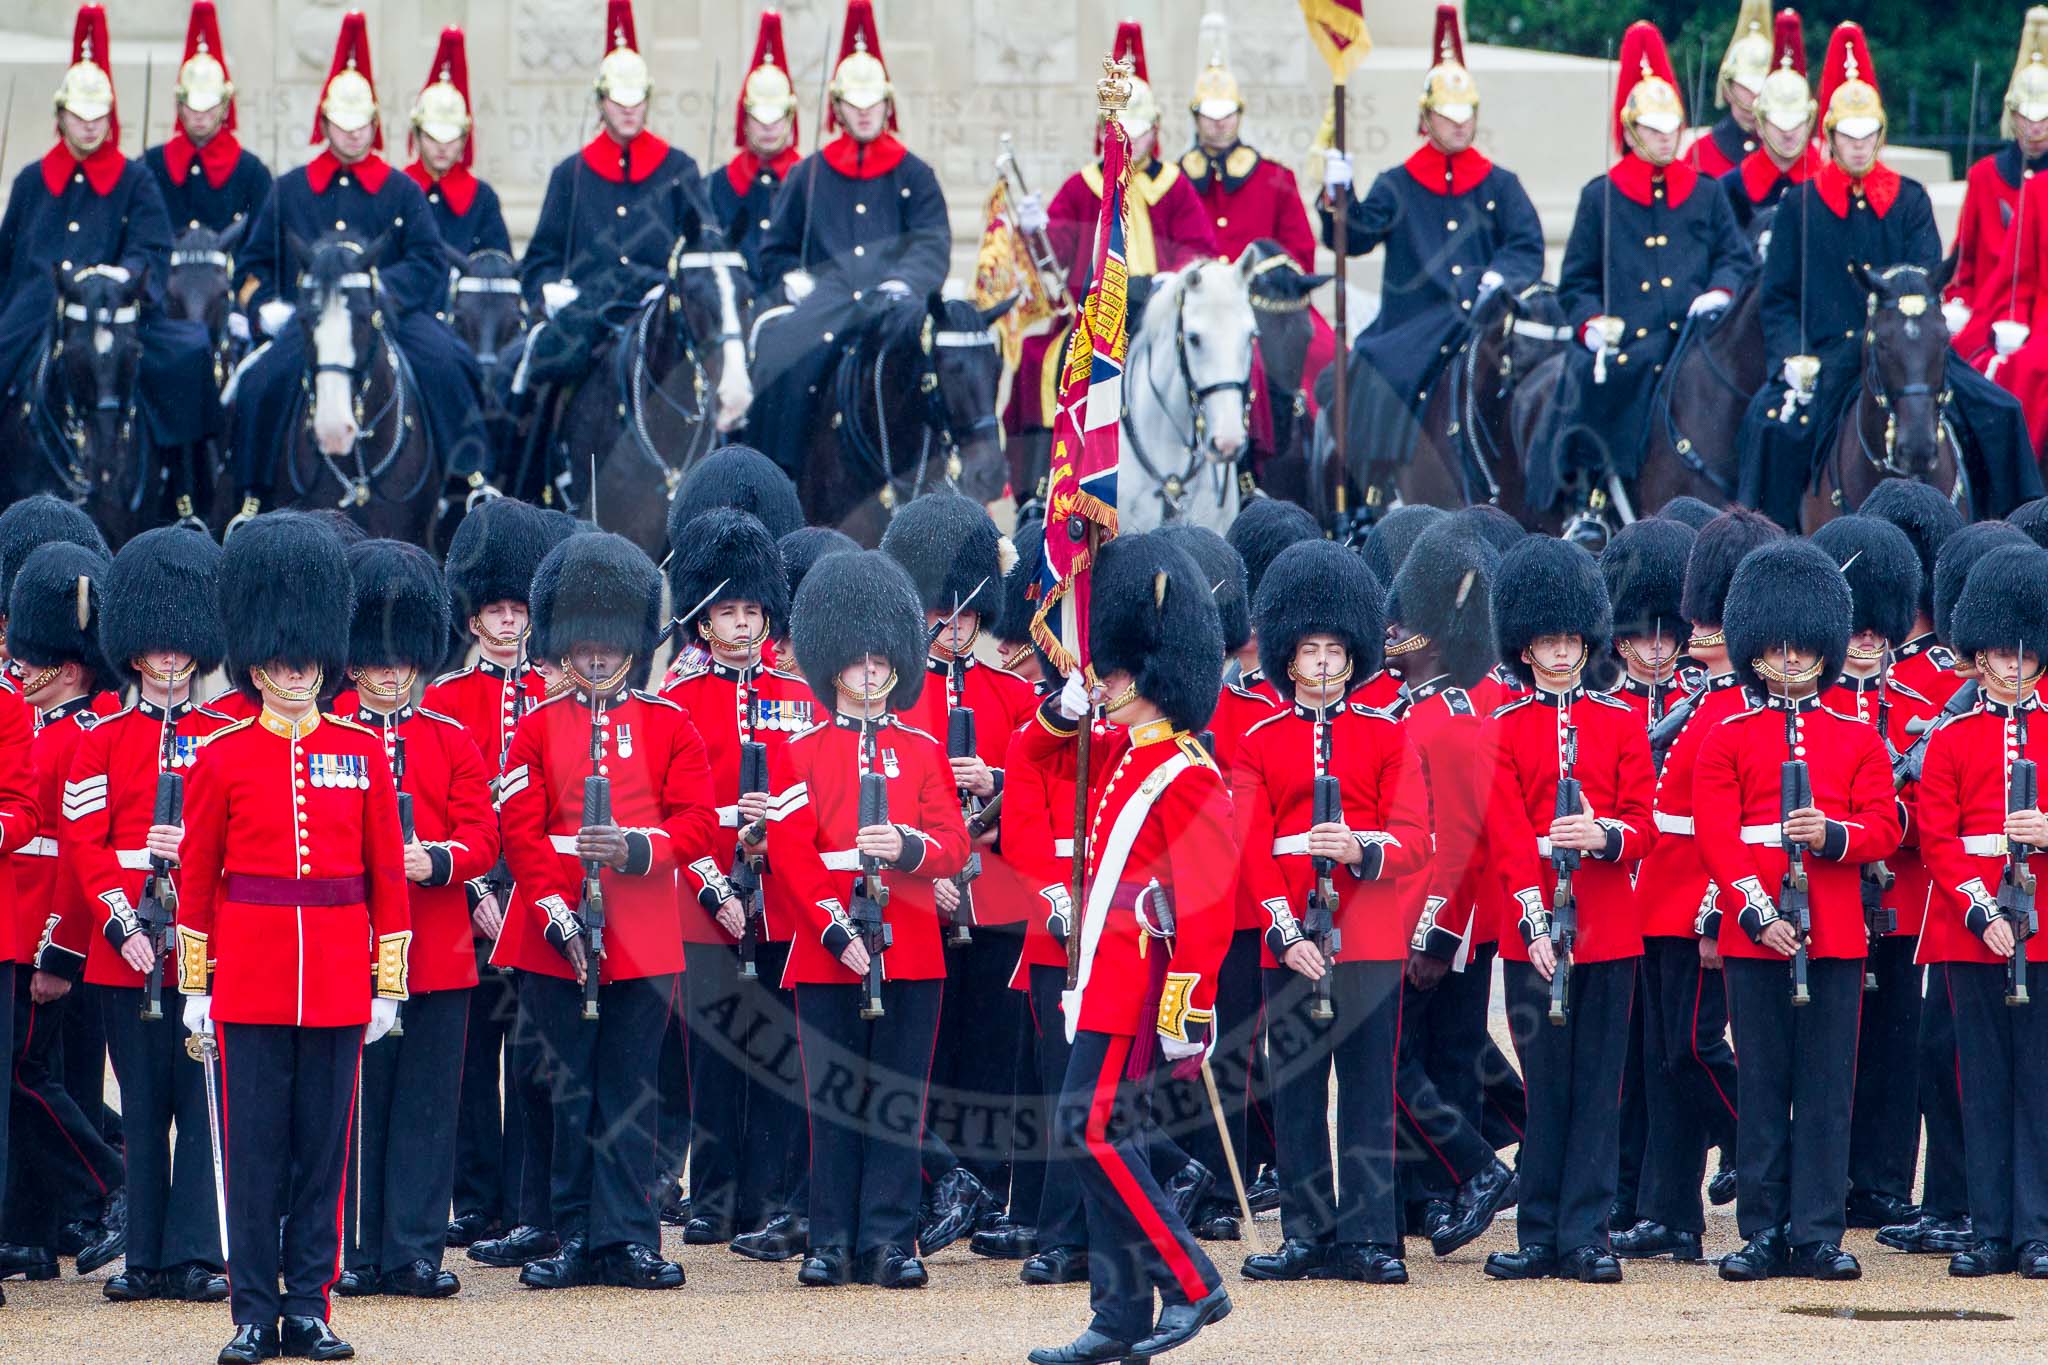 The Colonel's Review 2014.
Horse Guards Parade, Westminster,
London,

United Kingdom,
on 07 June 2014 at 11:25, image #441